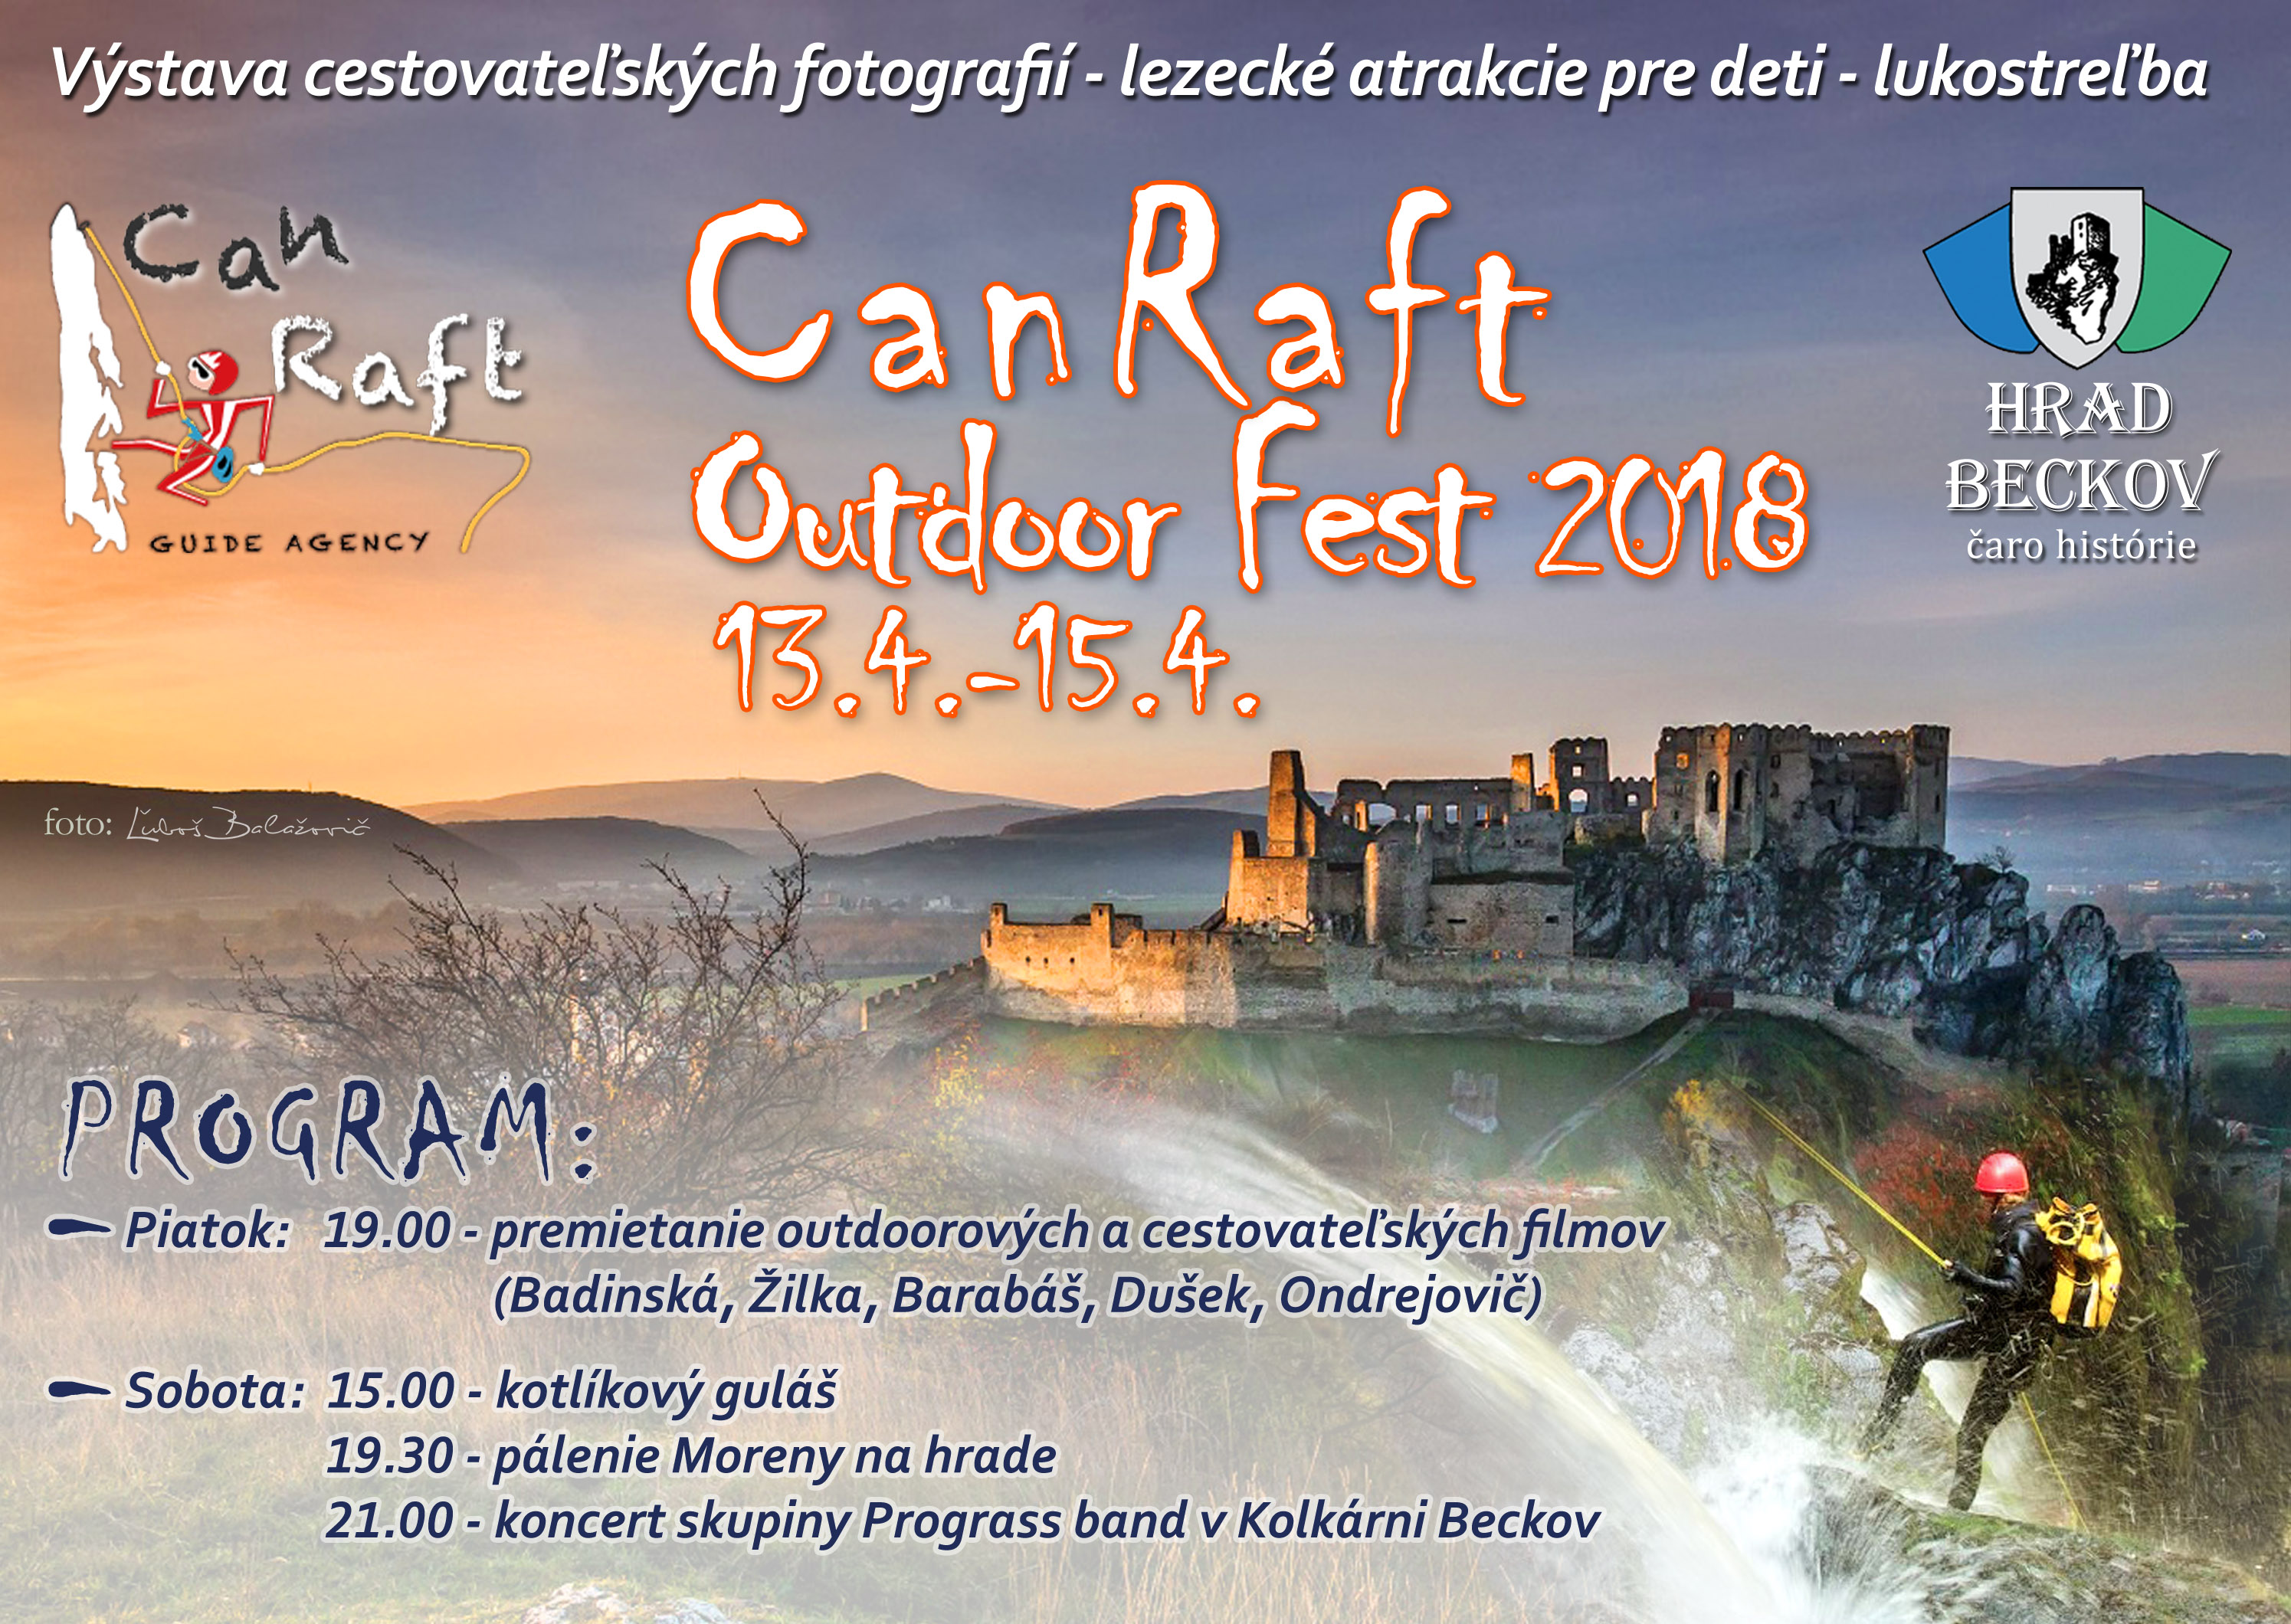 CanRaft Outdoor fest 2018